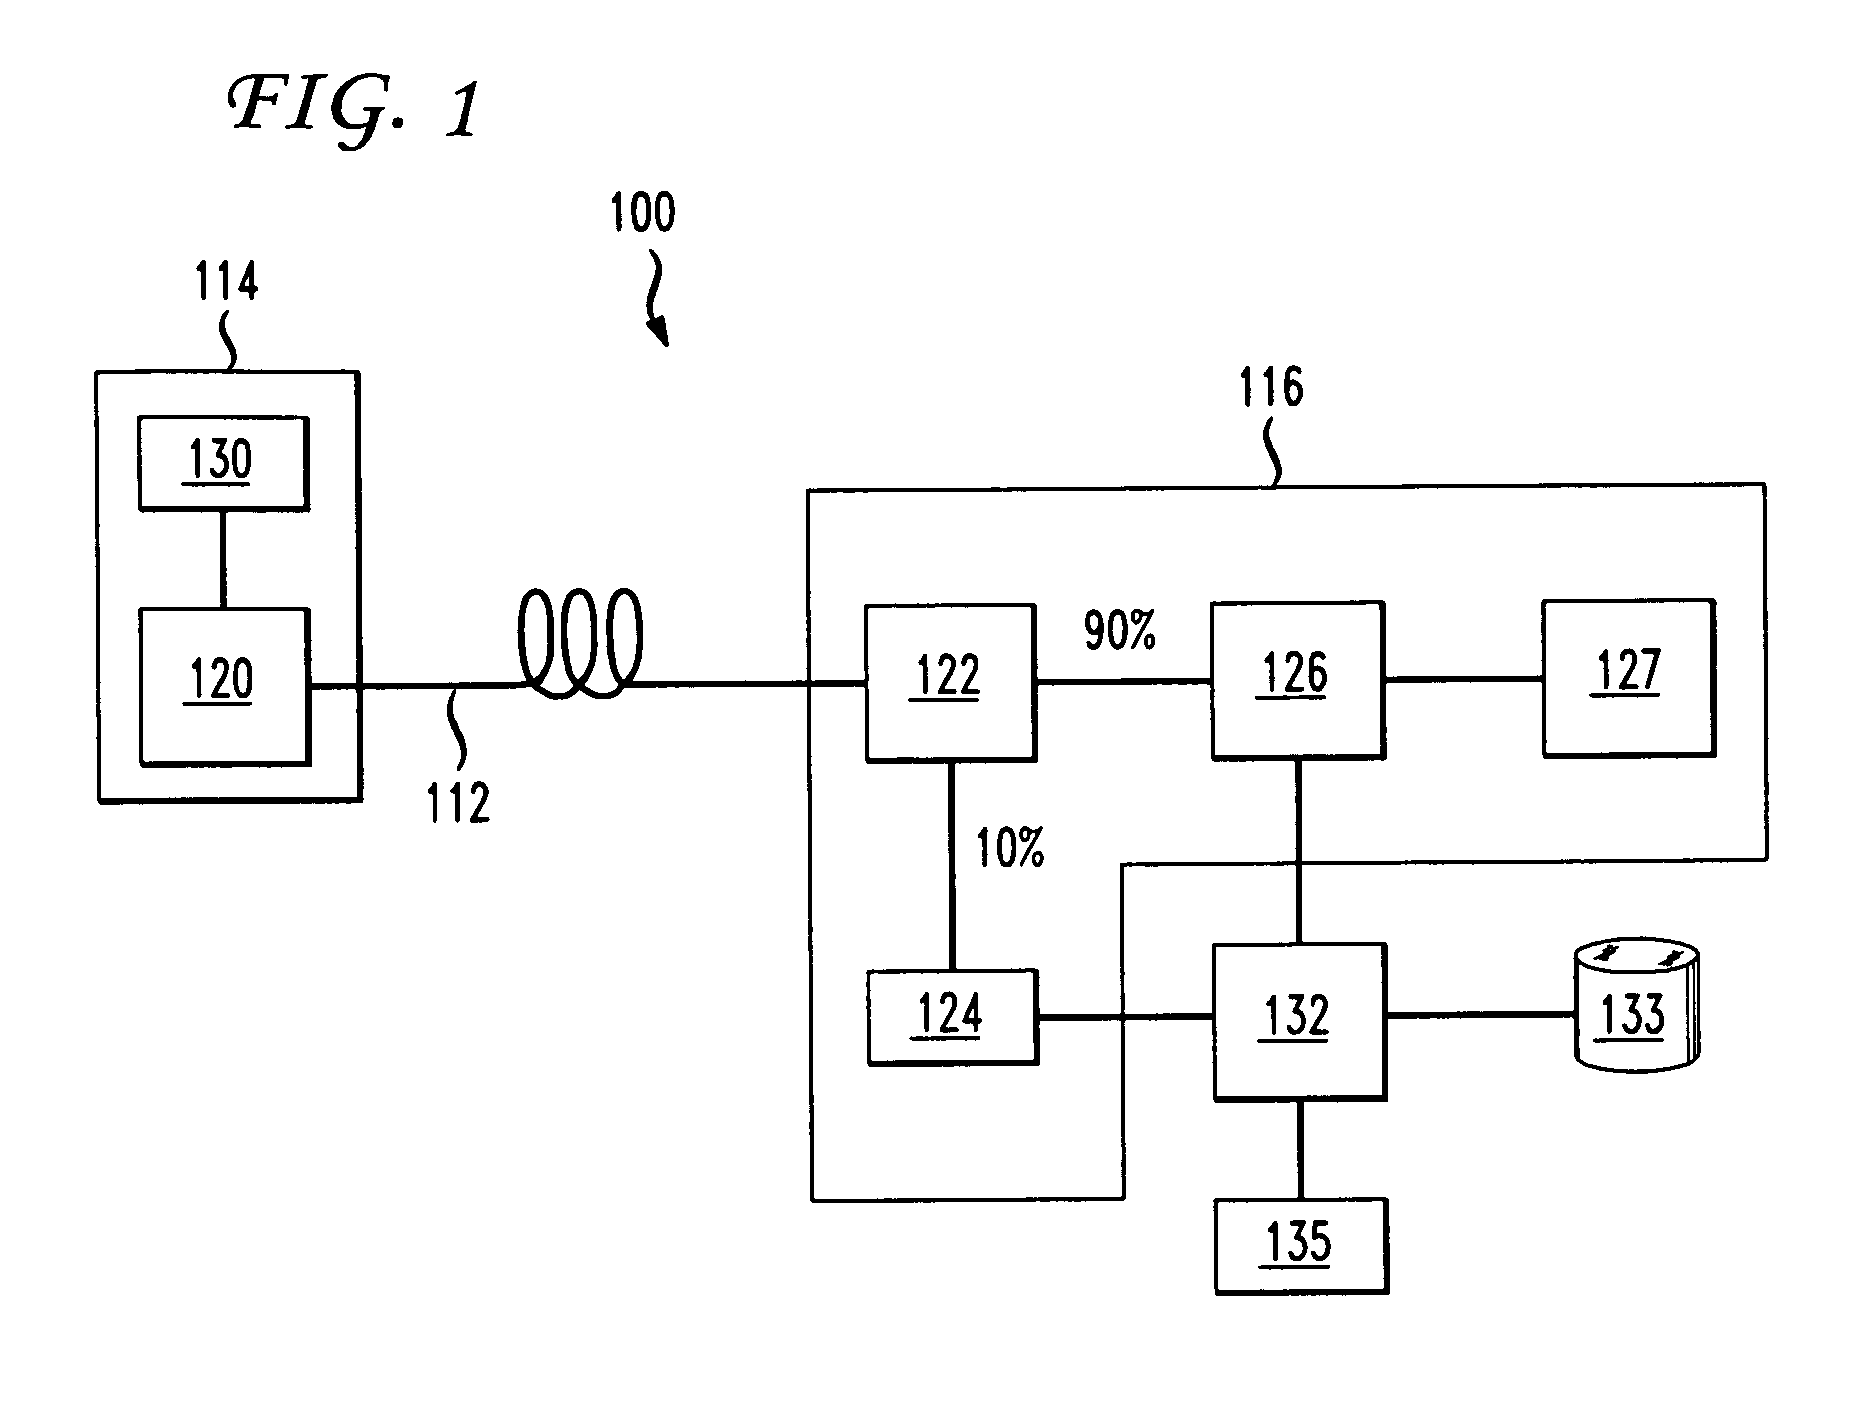 Method and apparatus for increasing the security of the physical fiber plant by polarization monitoring